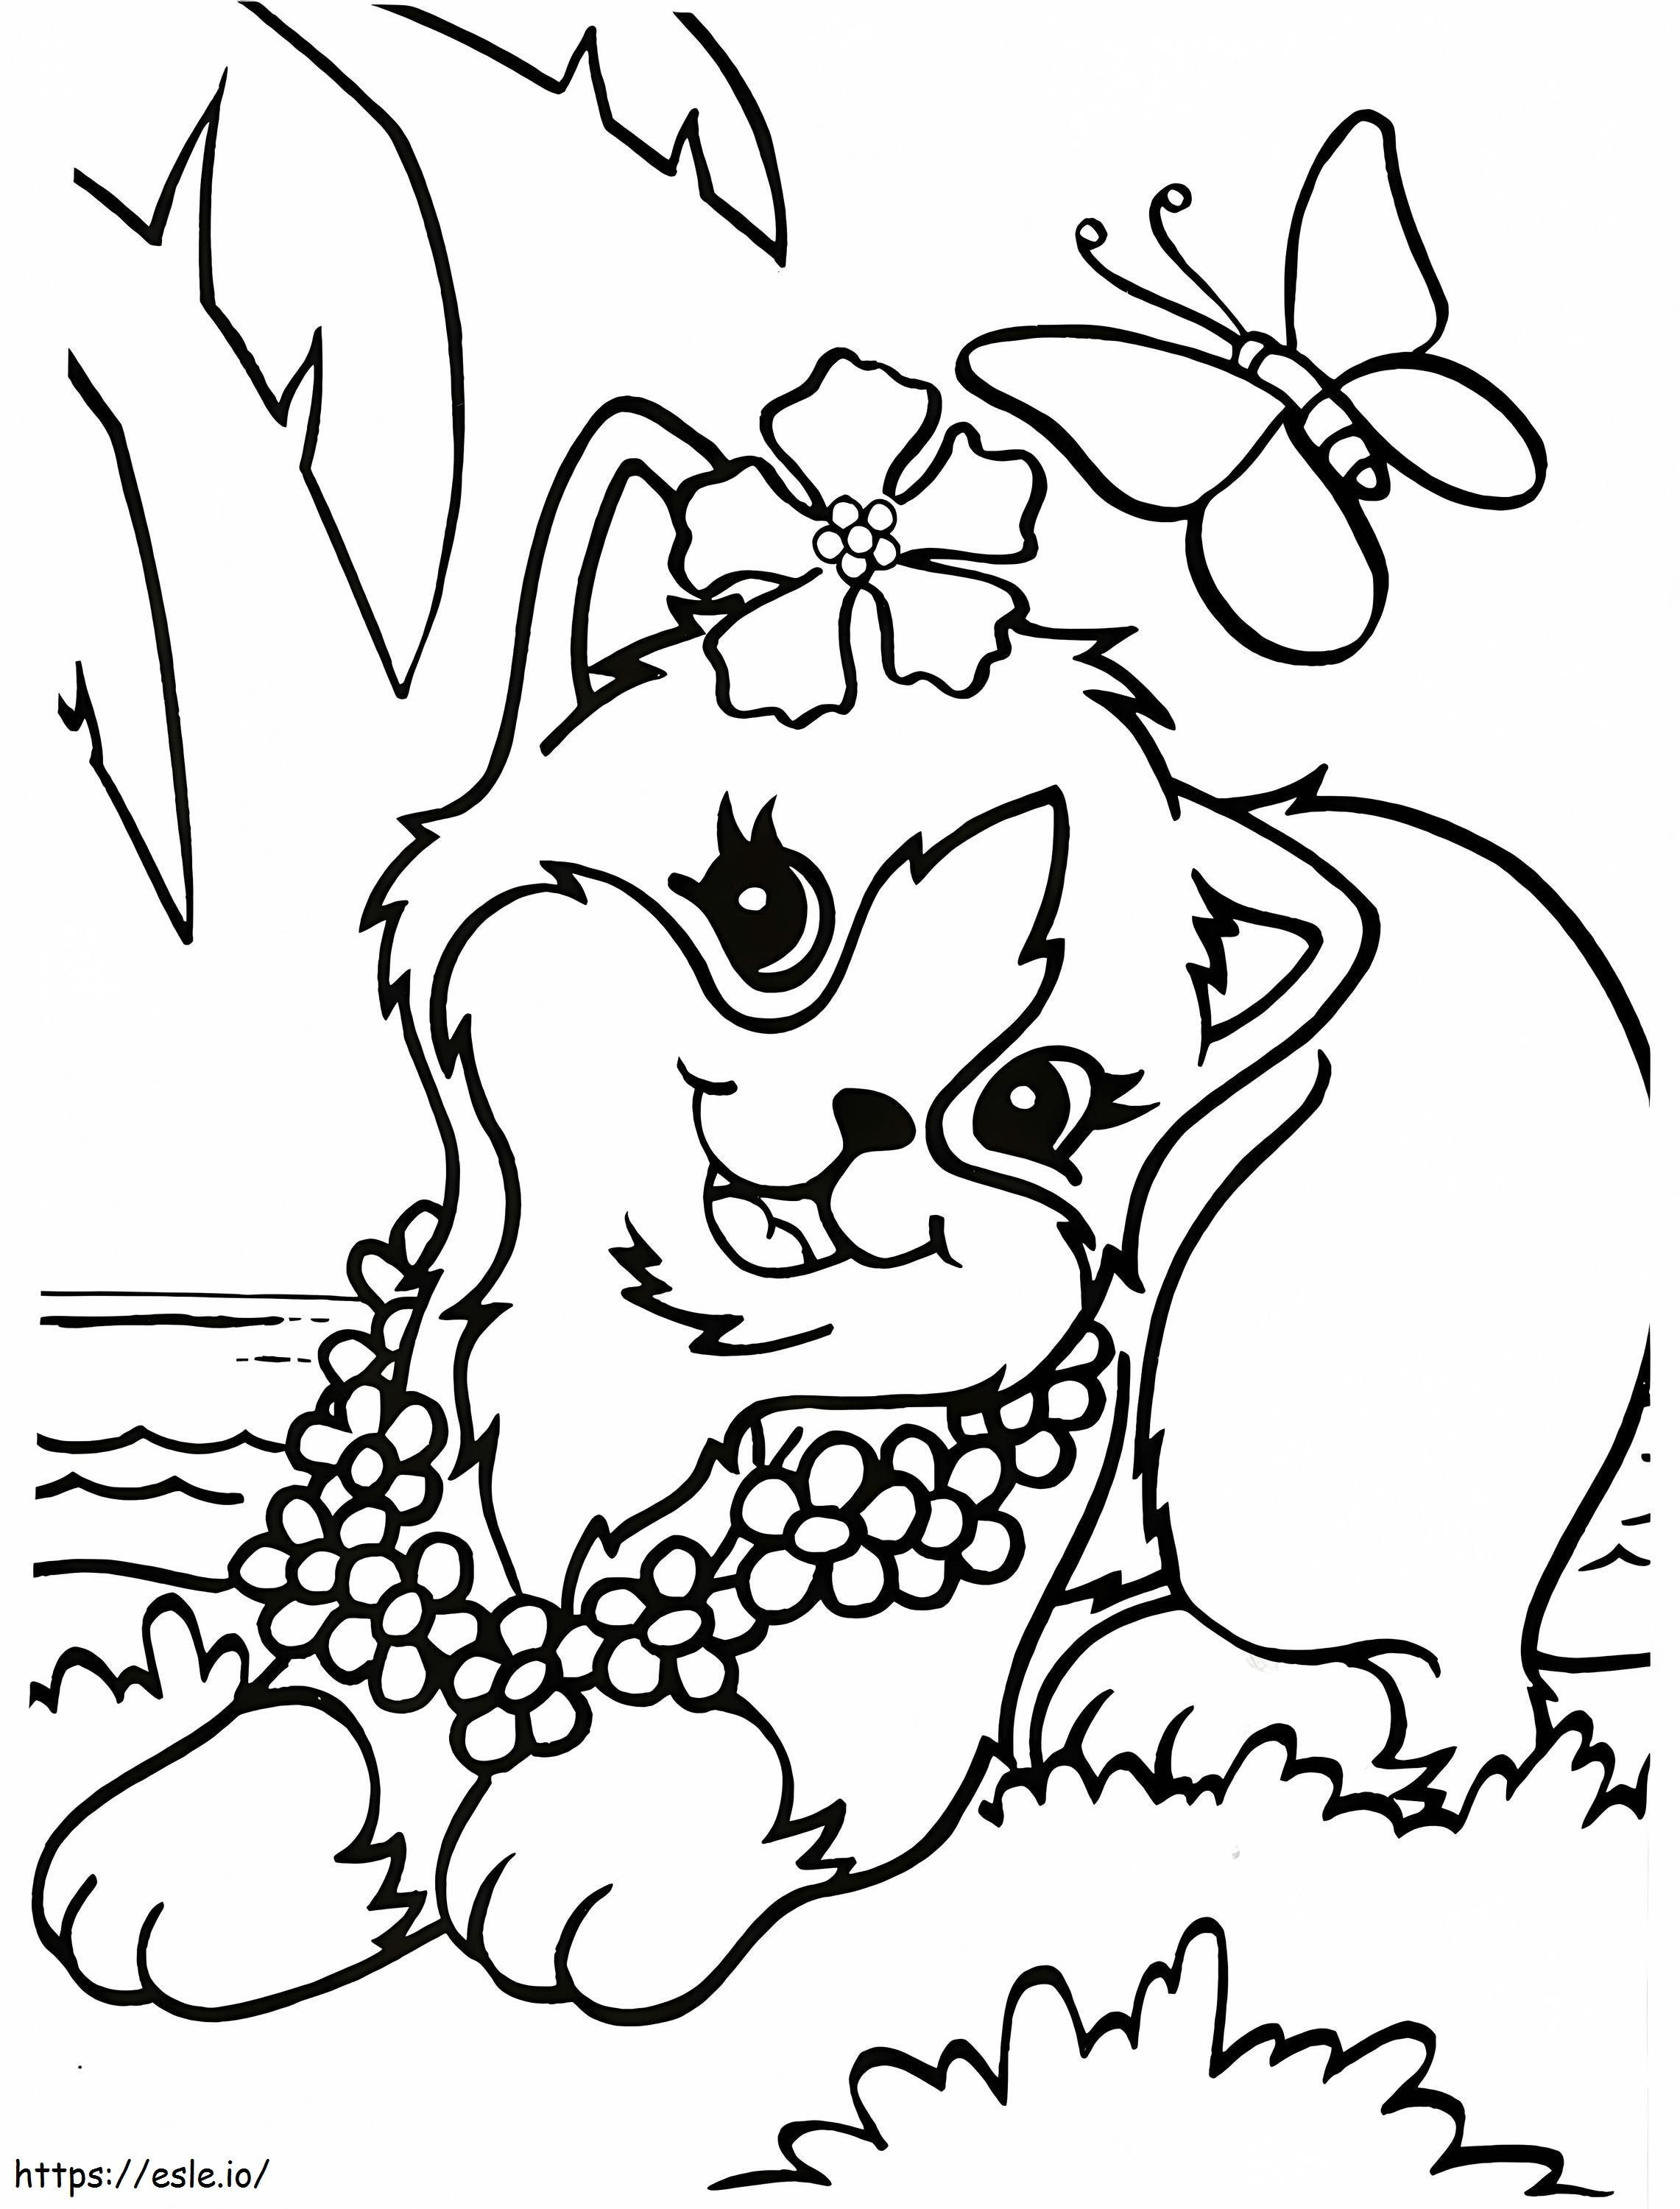 1566287093 Pretty Cat Lisa Frank A4 coloring page